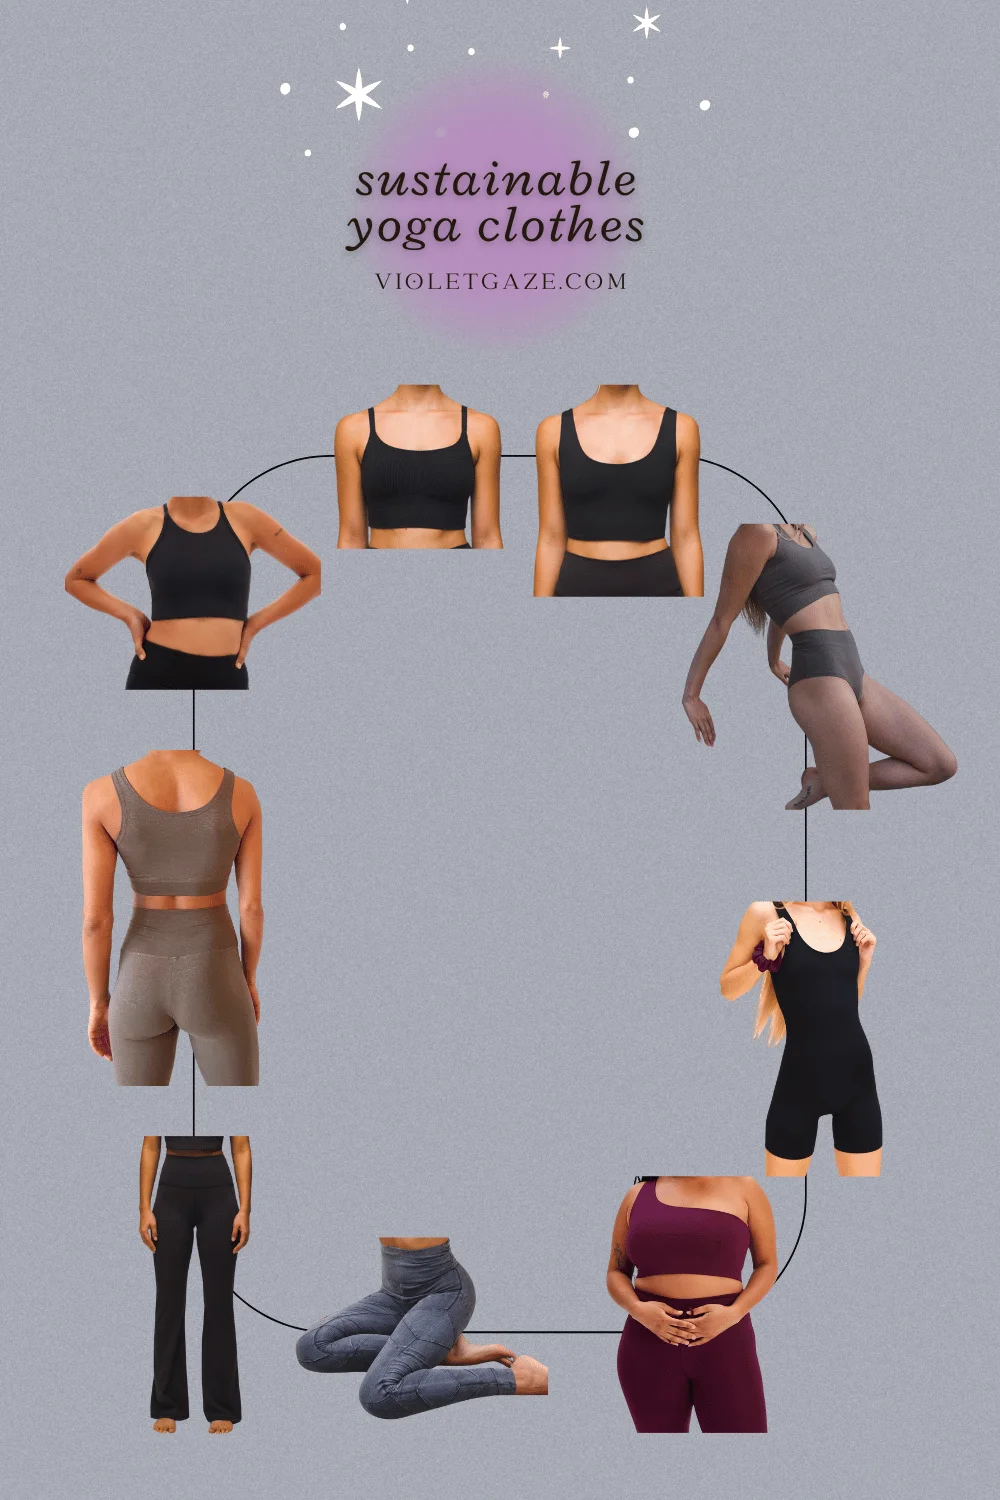 graphic of sustainable yoga pants and shirts for women